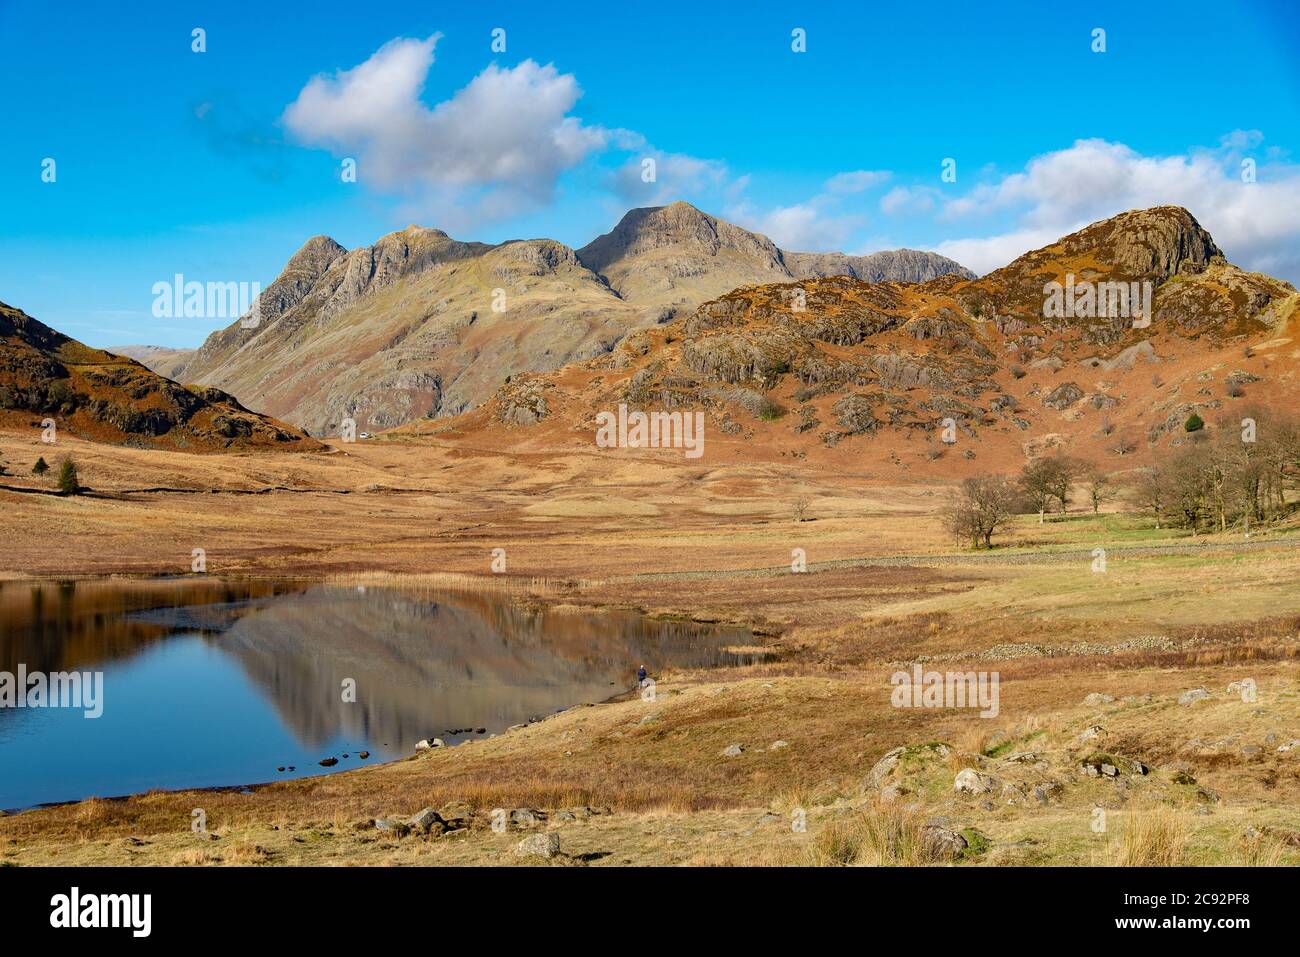 Blea Tarn, Langdale, Cumbria, il Lake District con Langdale Fell e Langdale Pikes in lontananza. Foto Stock